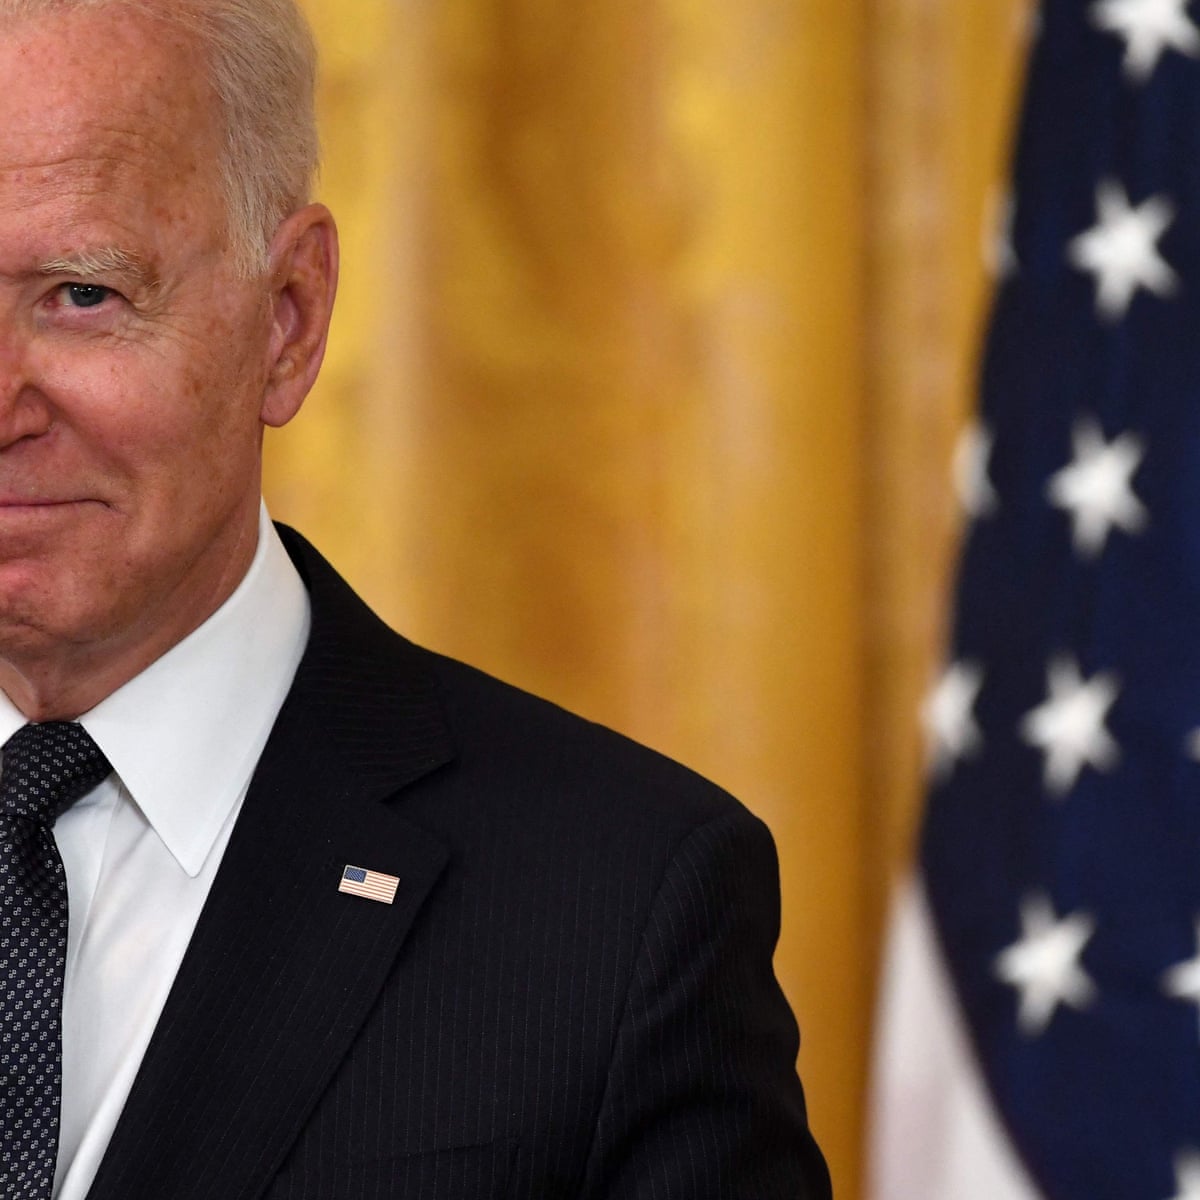 joe biden idiotic quotes - Biden|President|Joe|States|Delaware|Obama|Vice|Senate|Campaign|Election|Time|Administration|House|Law|People|Years|Family|Year|Trump|School|University|Senator|Office|Party|Country|Committee|Act|War|Days|Climate|Hunter|Health|America|State|Day|Democrats|Americans|Documents|Care|Plan|United States|Vice President|White House|Joe Biden|Biden Administration|Democratic Party|Law School|Presidential Election|President Joe Biden|Executive Orders|Foreign Relations Committee|Presidential Campaign|Second Term|47Th Vice President|Syracuse University|Climate Change|Hillary Clinton|Last Year|Barack Obama|Joseph Robinette Biden|U.S. Senator|Health Care|U.S. Senate|Donald Trump|President Trump|President Biden|Federal Register|Judiciary Committee|Presidential Nomination|Presidential Medal